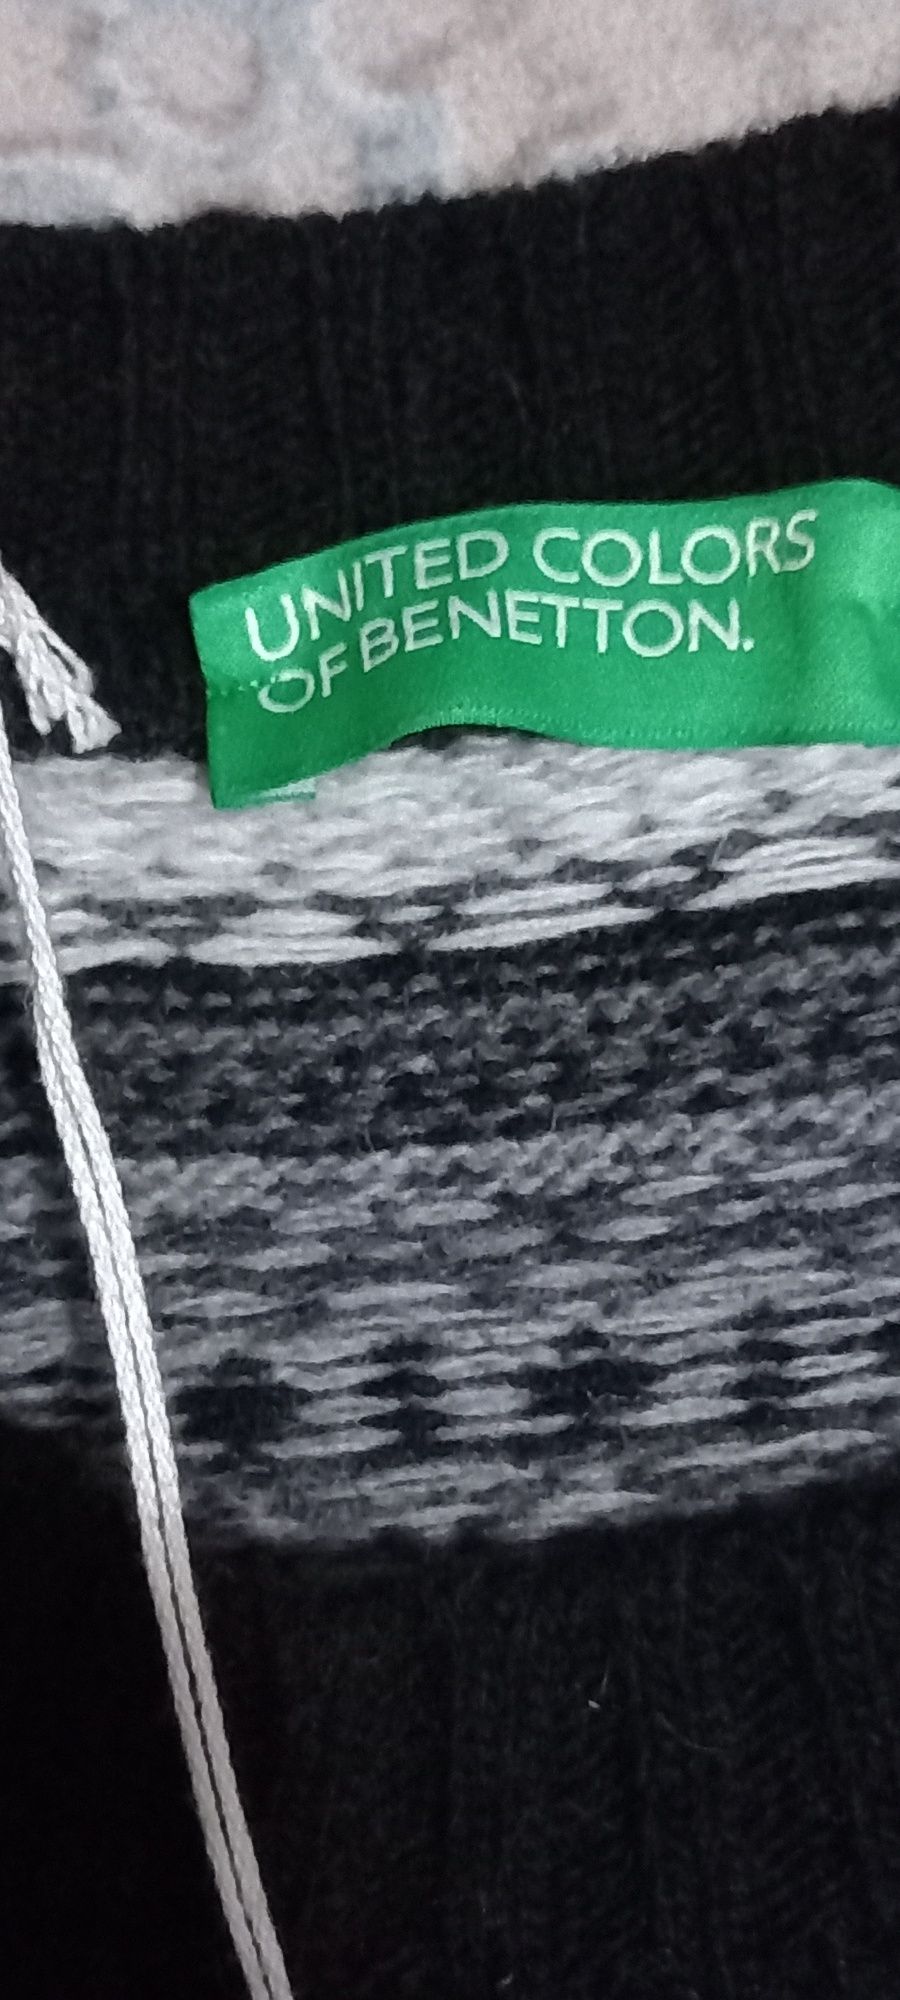 Pulover United Colors Of Benetton nou